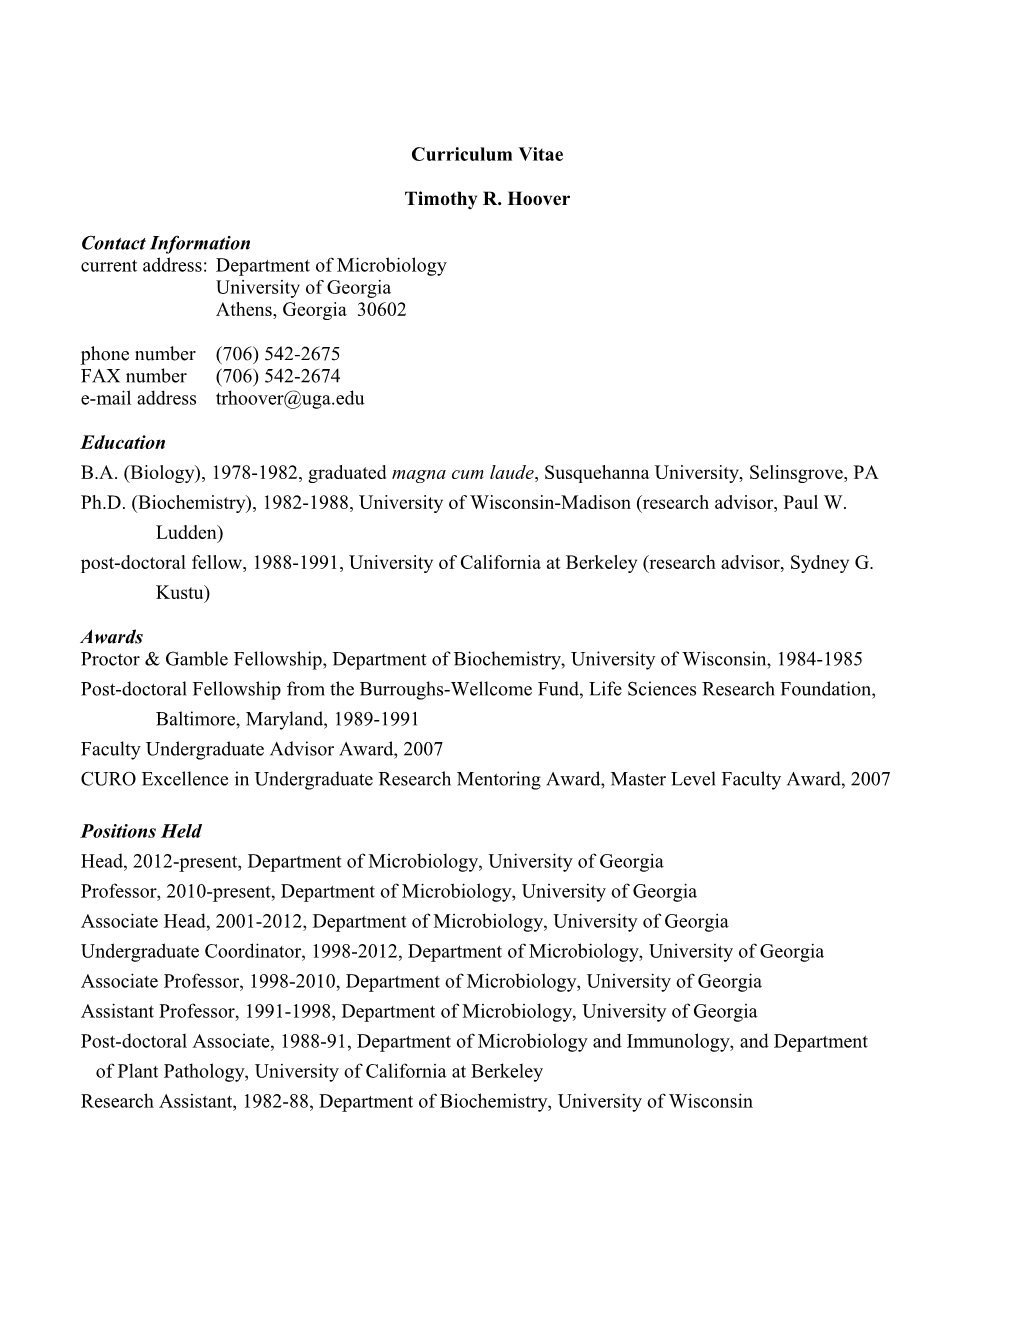 Curriculum Vitae for Timothy R. Hoover